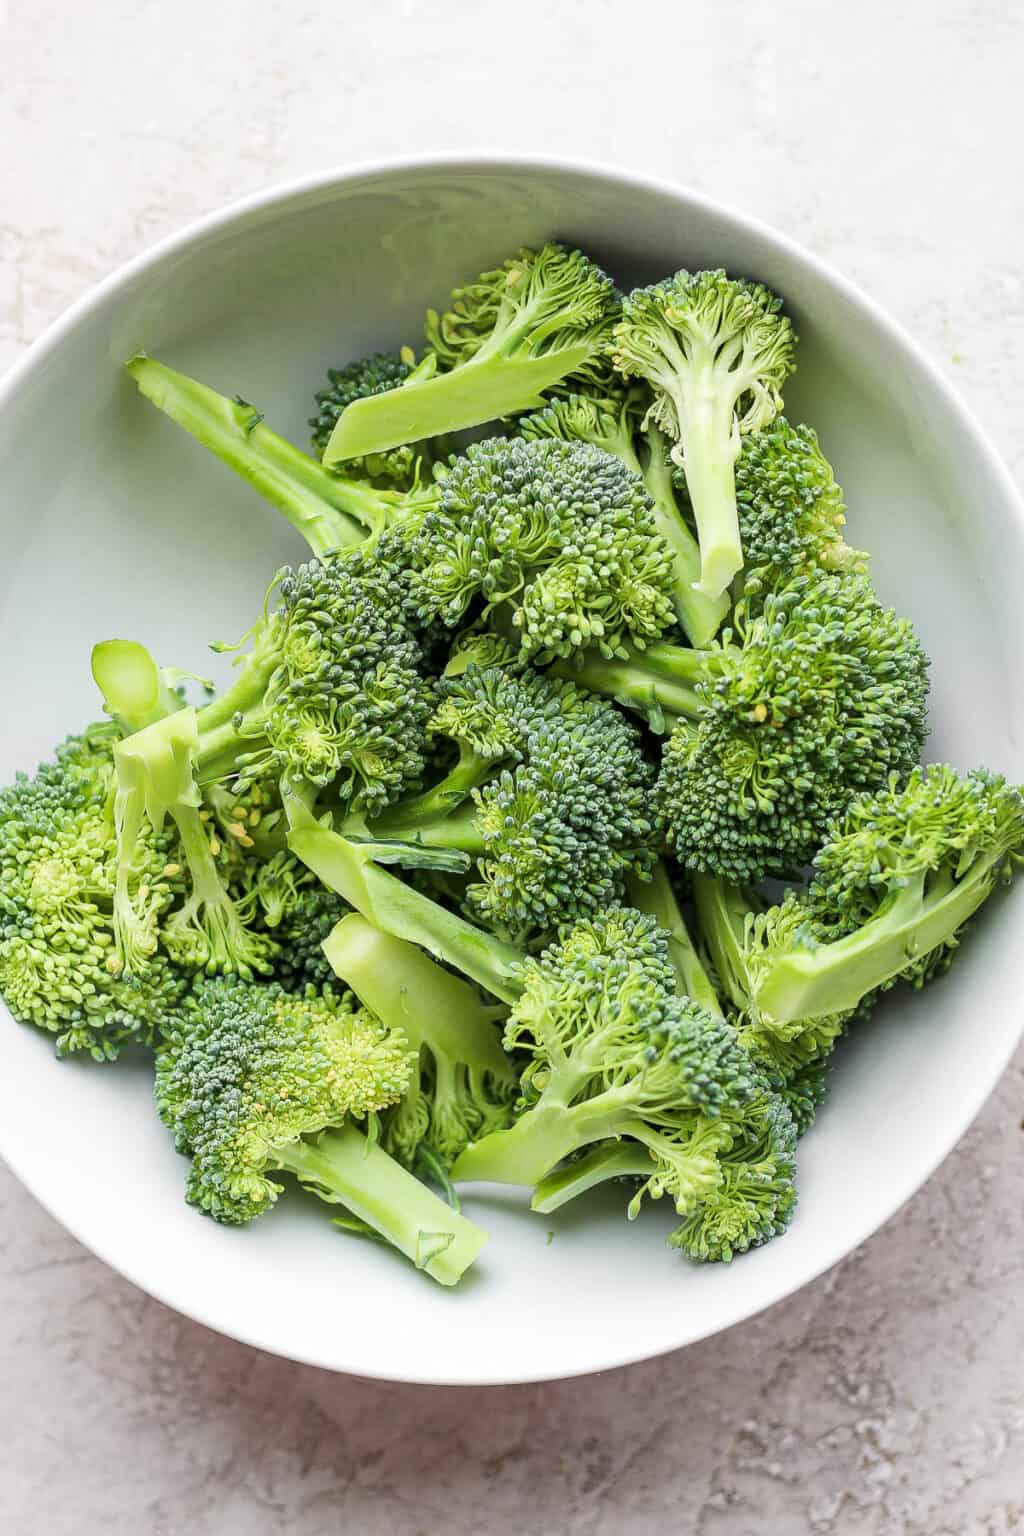 How to Cut Broccoli [Step-by-Step Tutorial} - FeelGoodFoodie